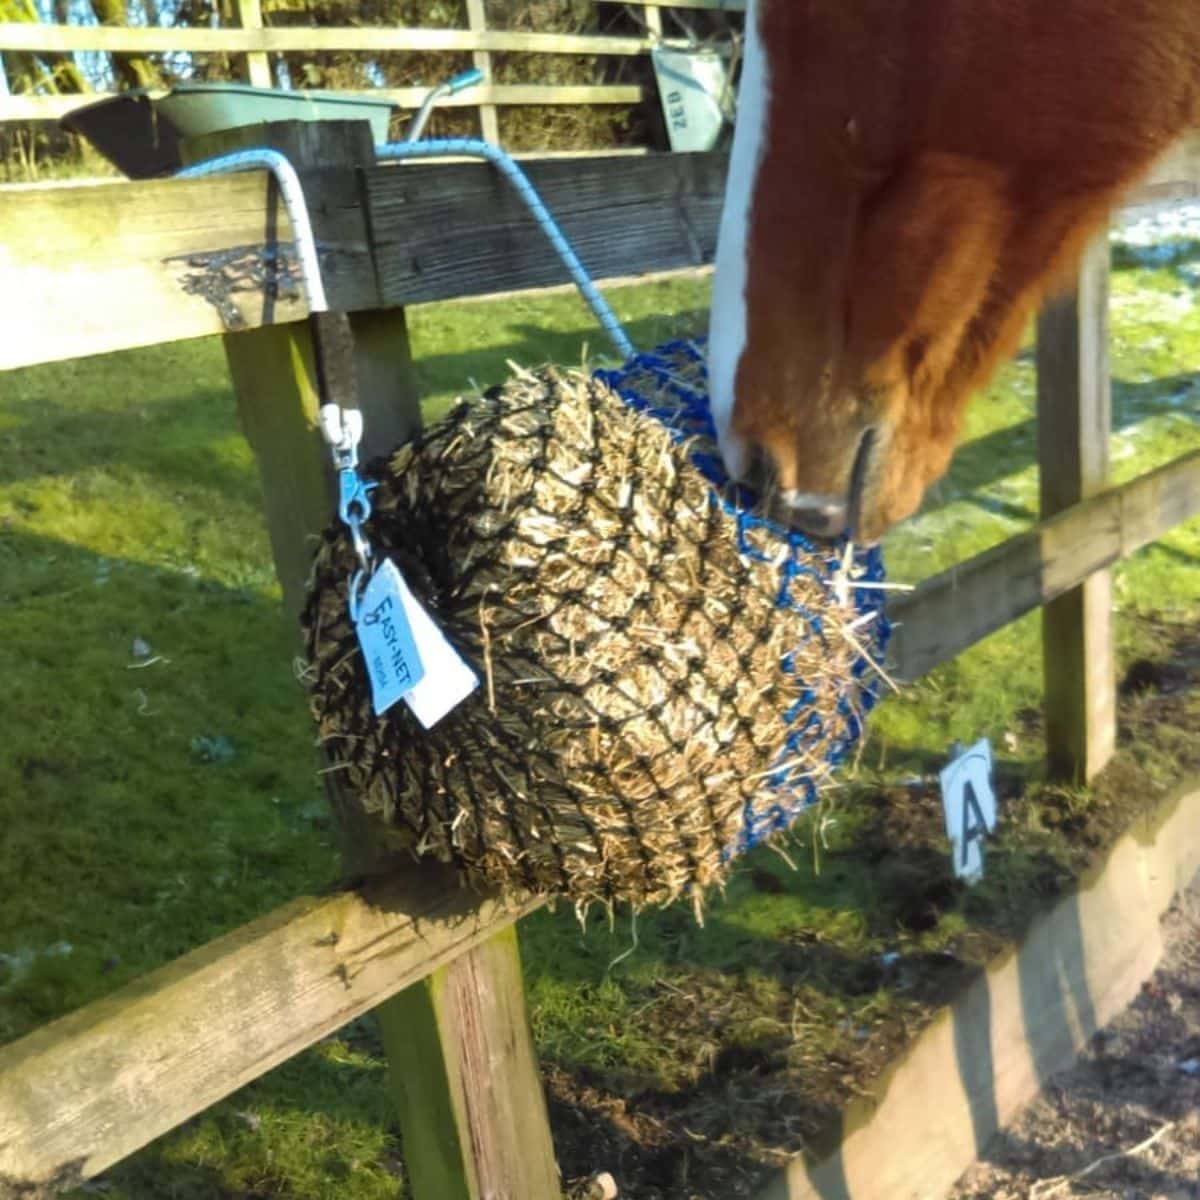 A brown horse grazes from a net feeder hanging on a wooden fence.